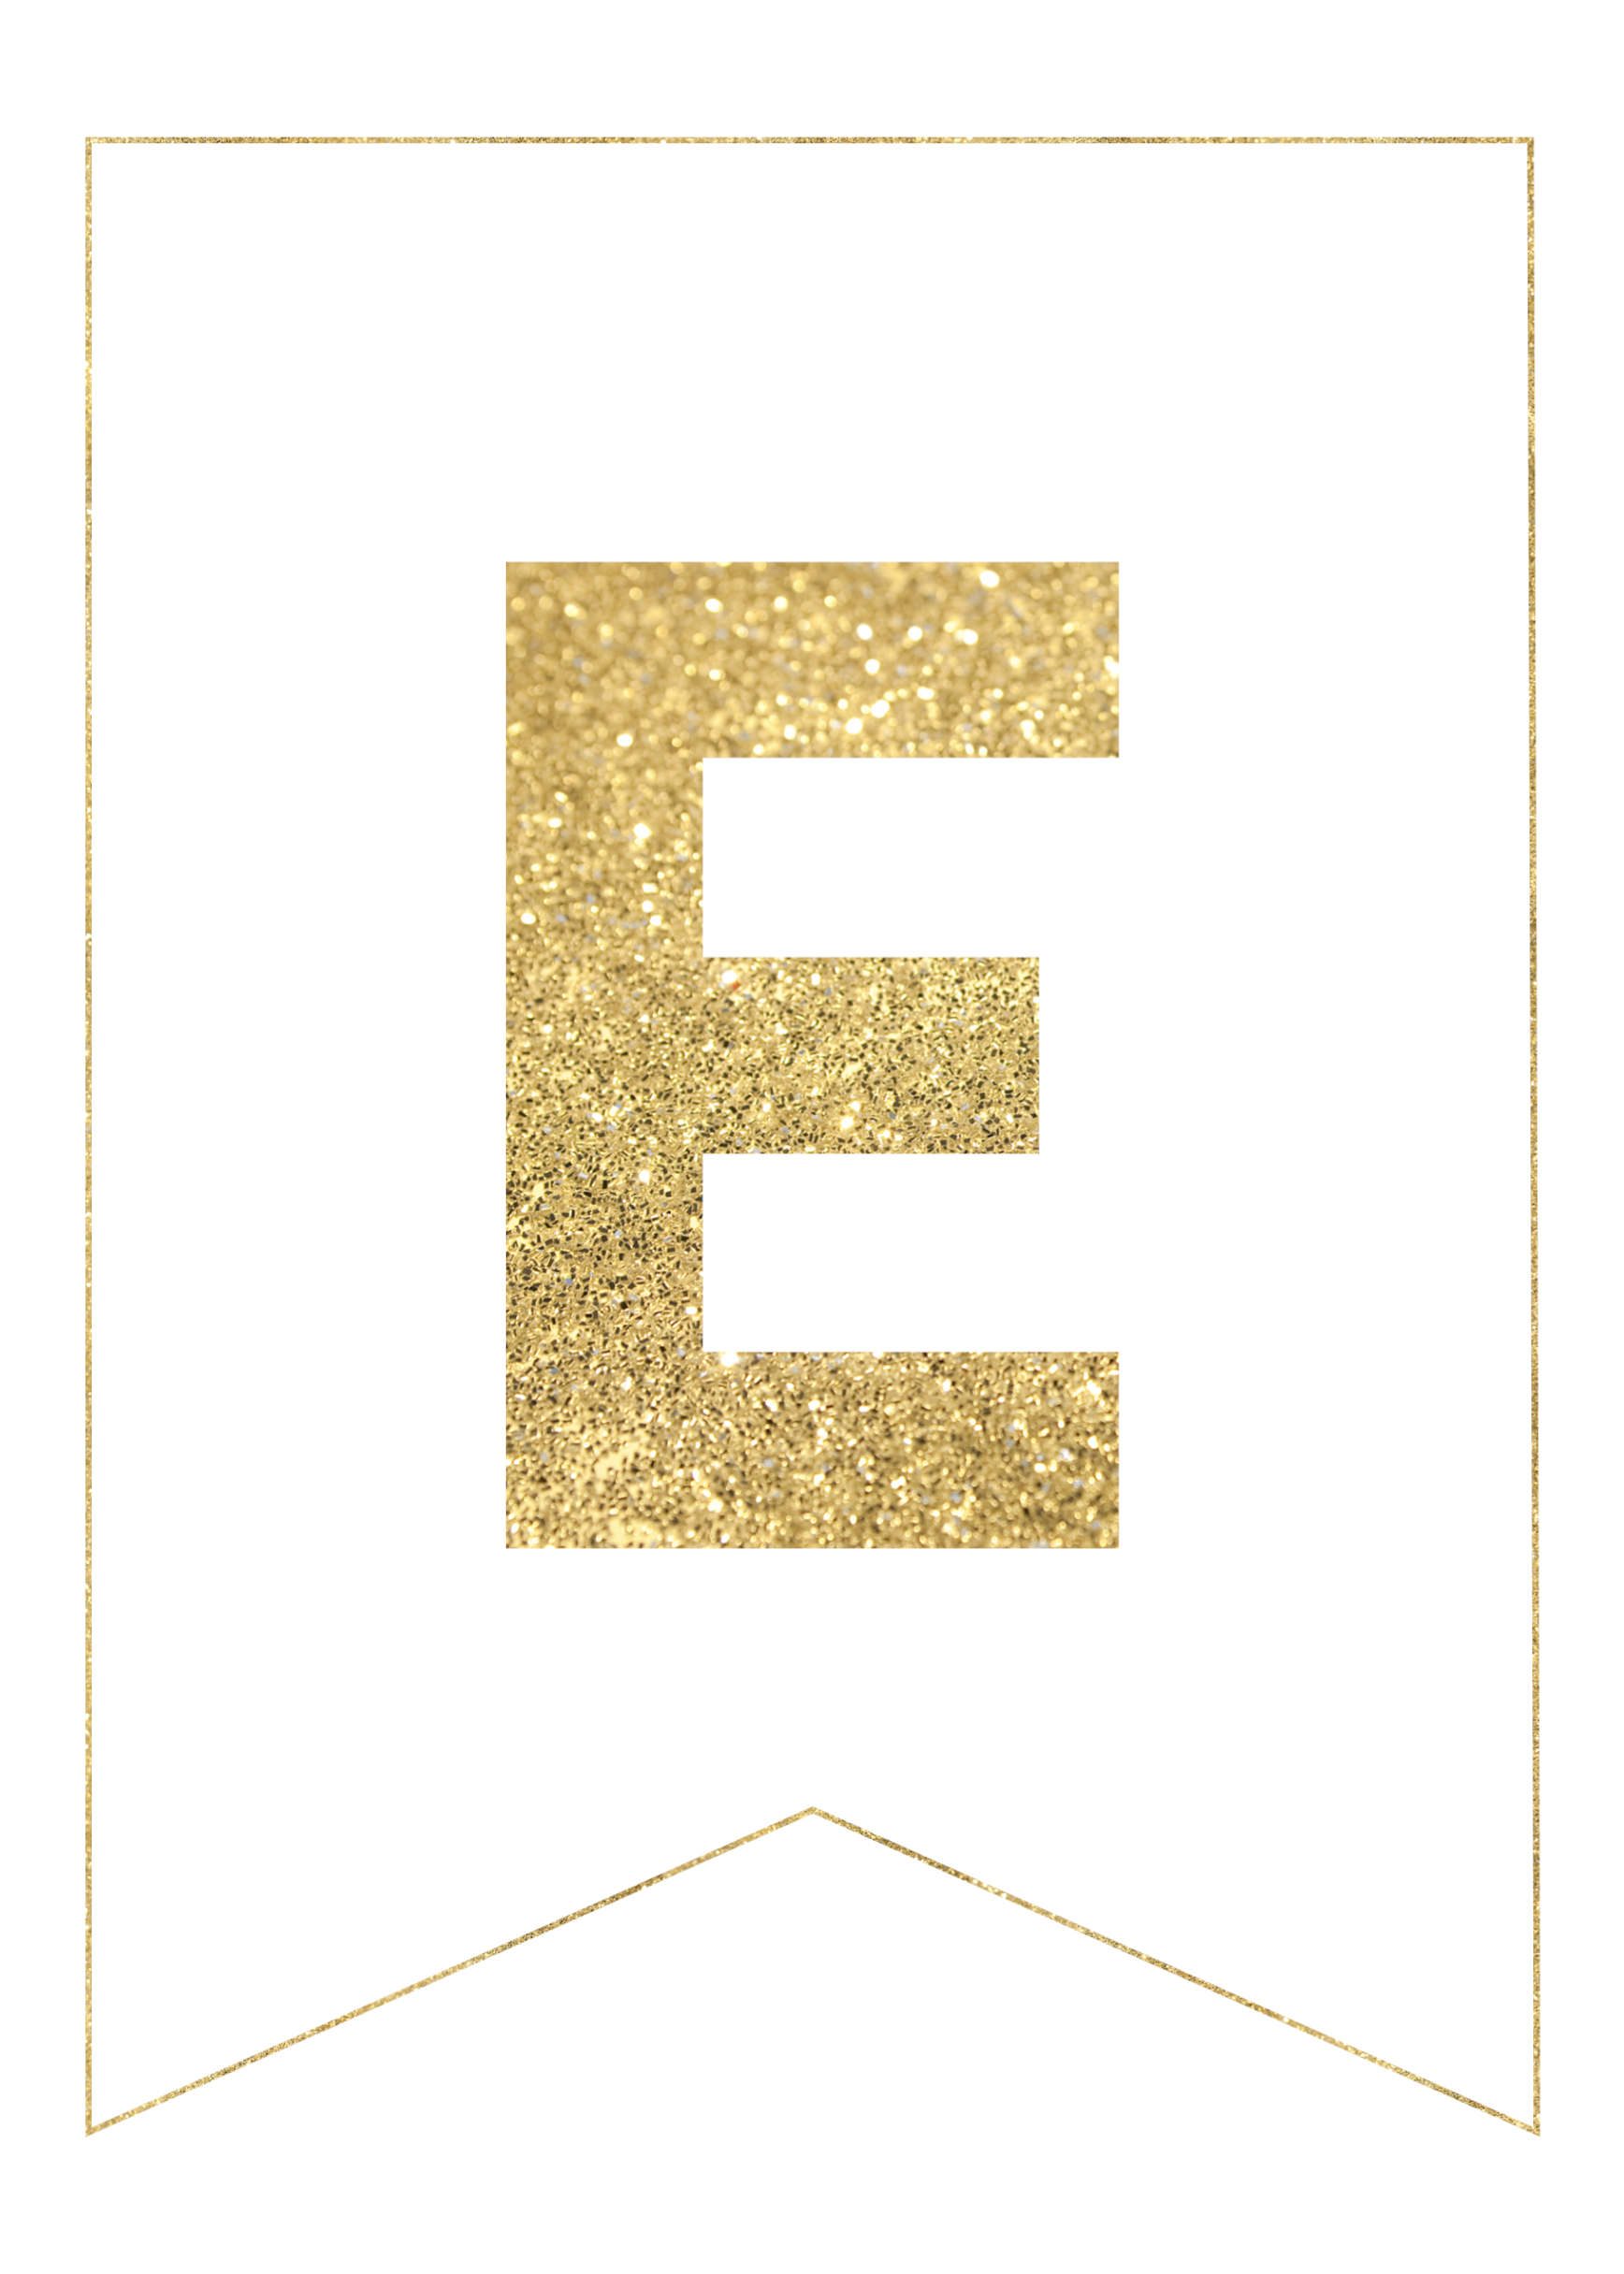 Gold Free Printable Banner Letters Paper Trail Design